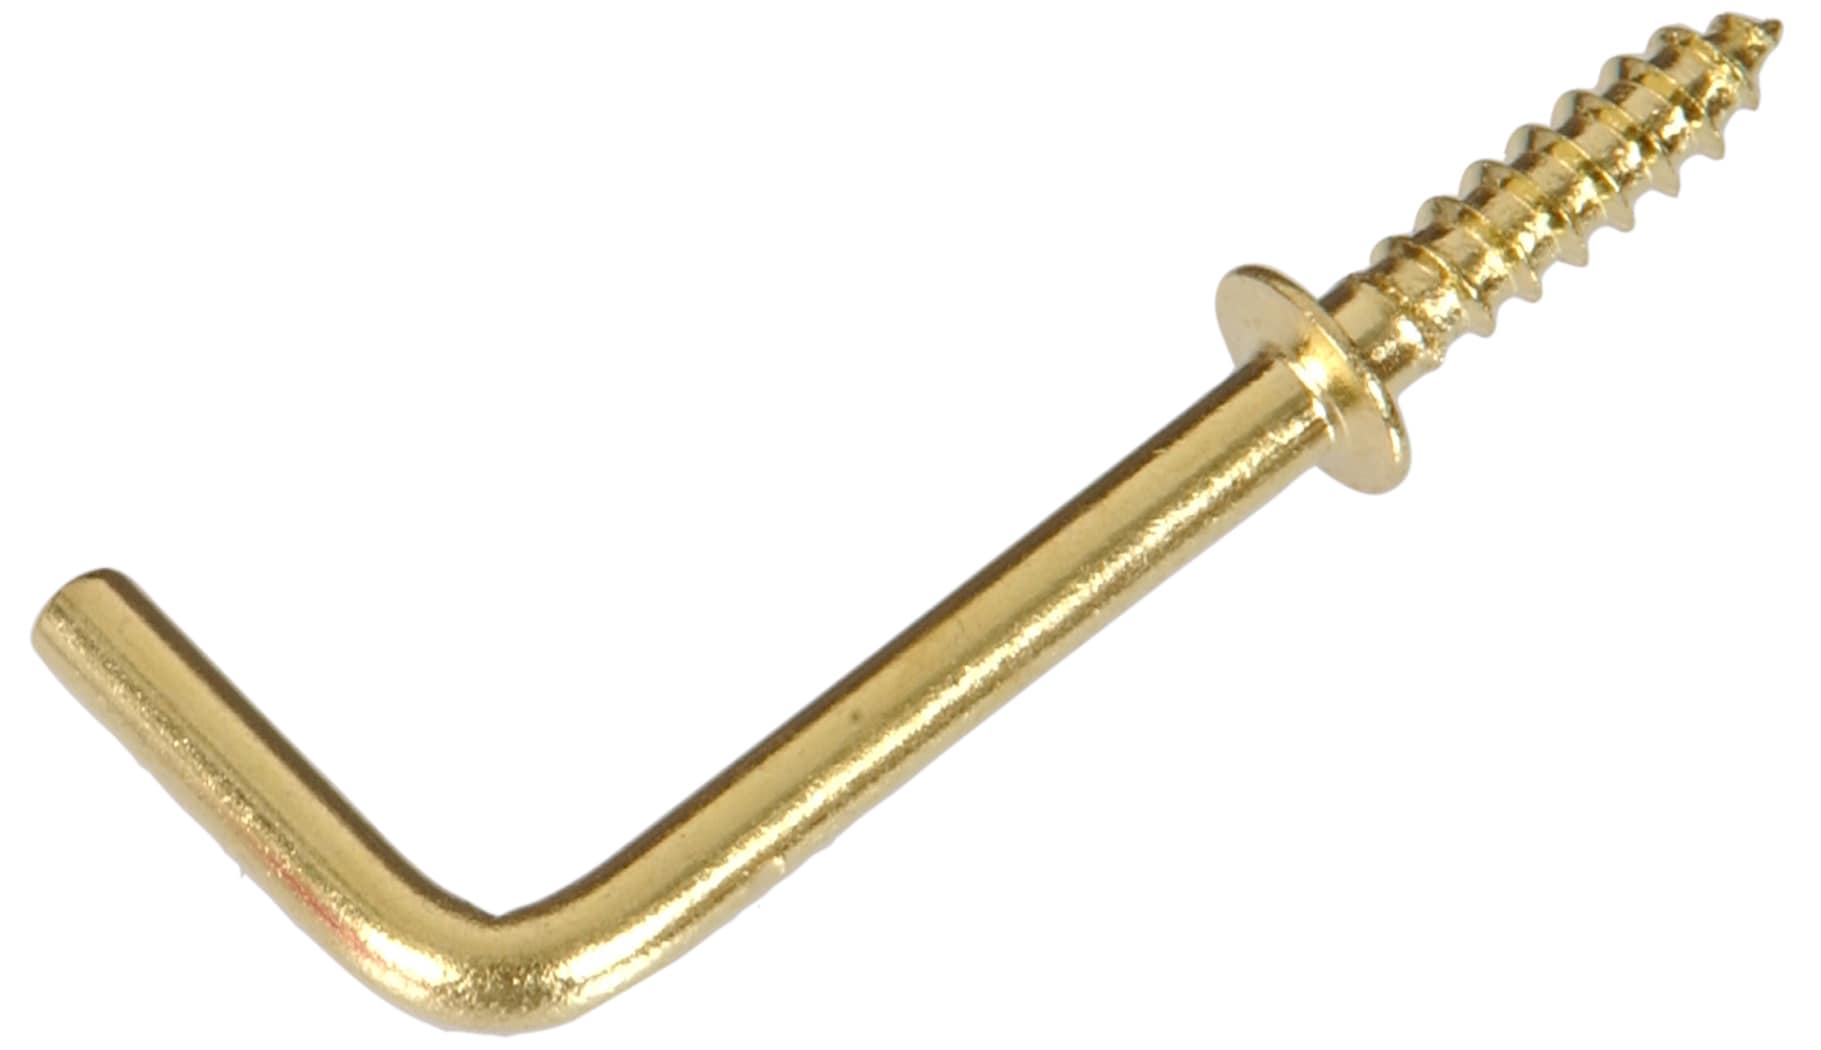 Brass Cup Hooks at Rs 40/pack, Brass Door Hook in Amritsar